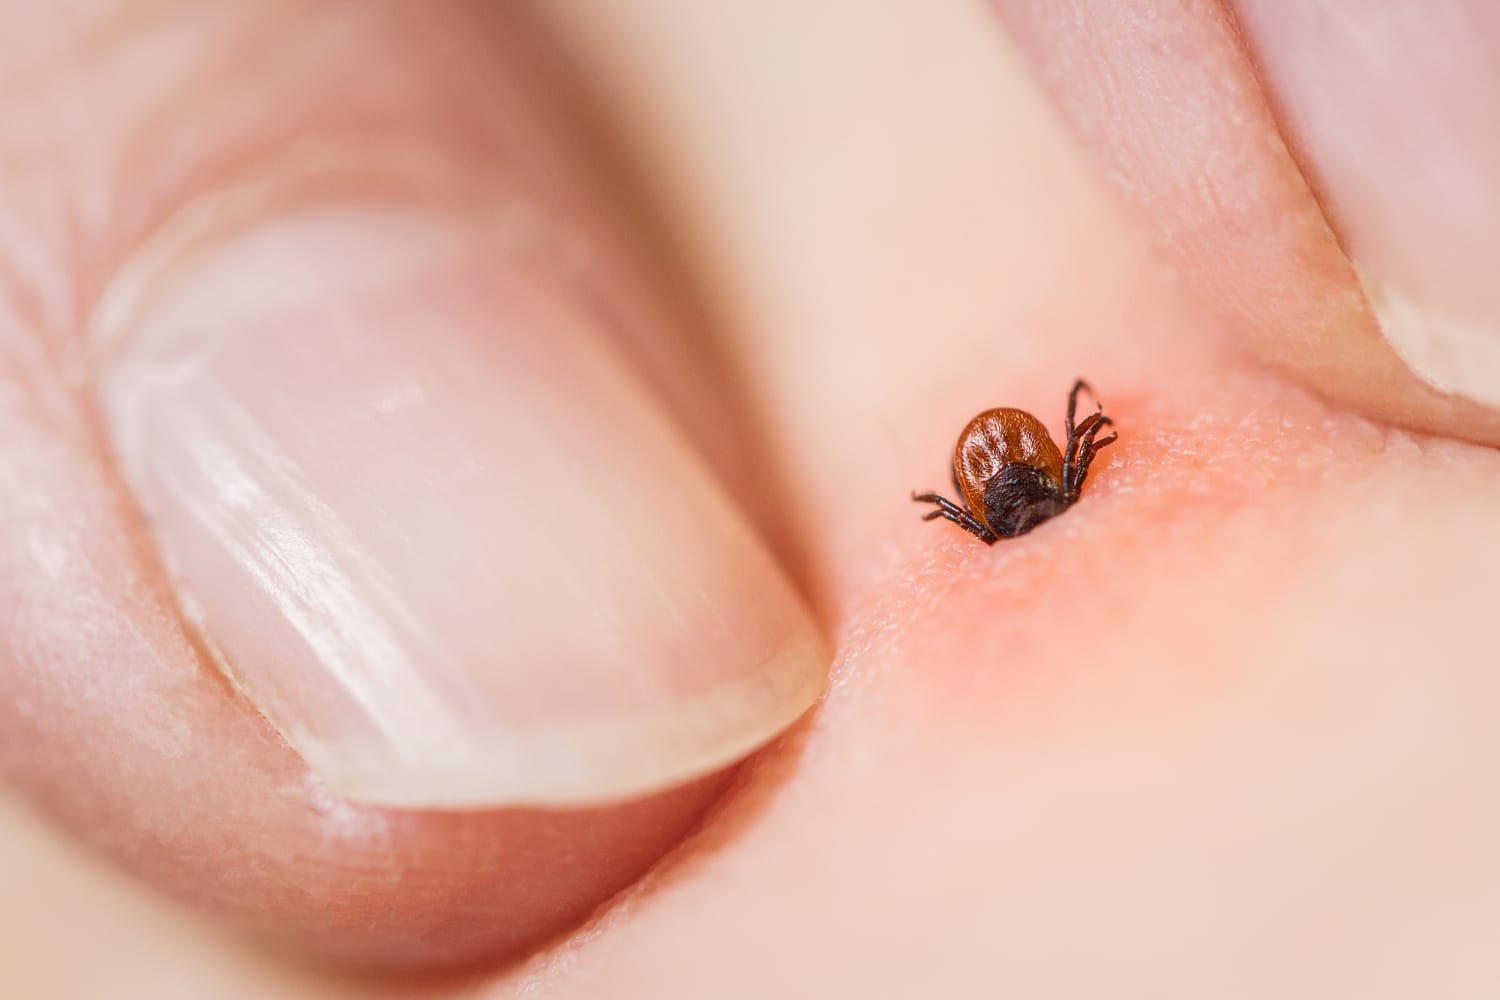 Tick Bite Symptoms to Know, According to Experts